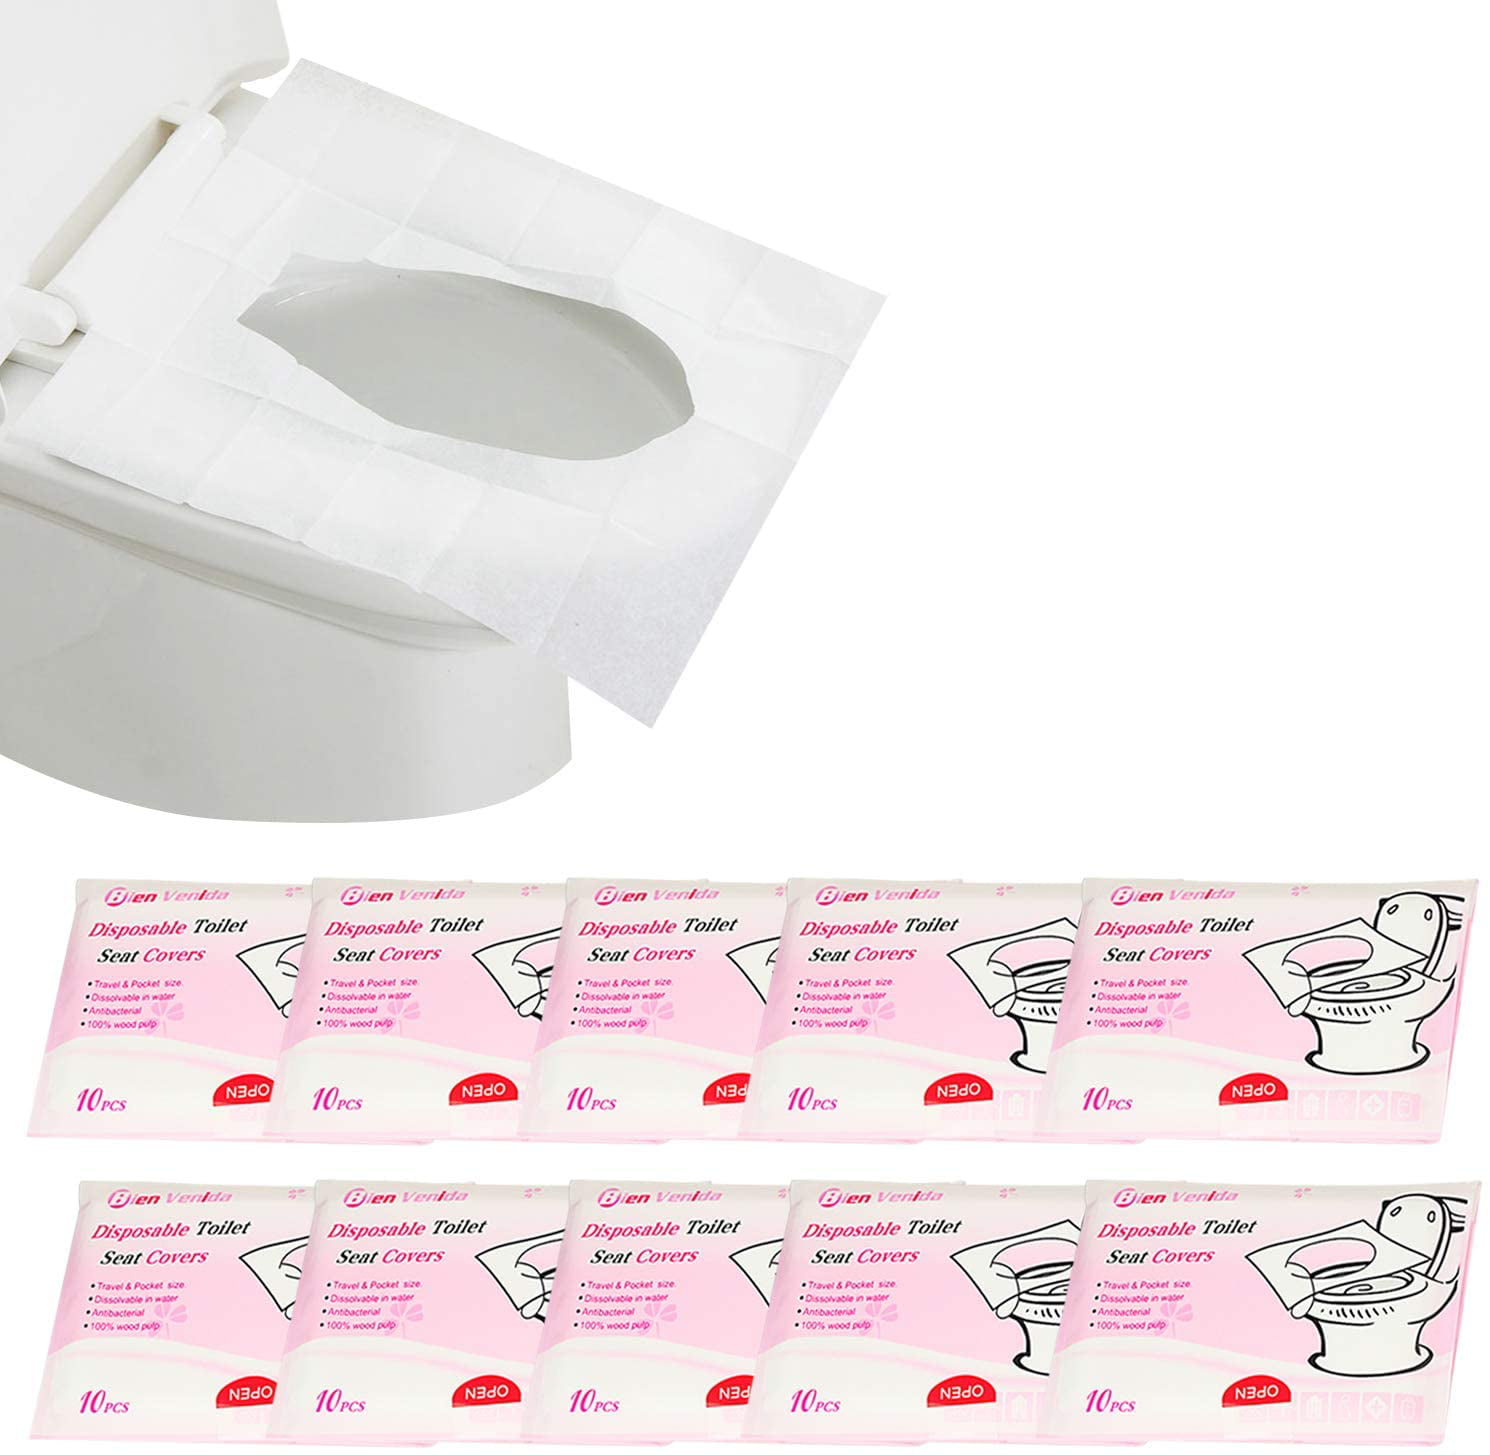 1000s Disposable Hygienic Toilet Home Travel Sanitary Flushable Clean Seat Cover 